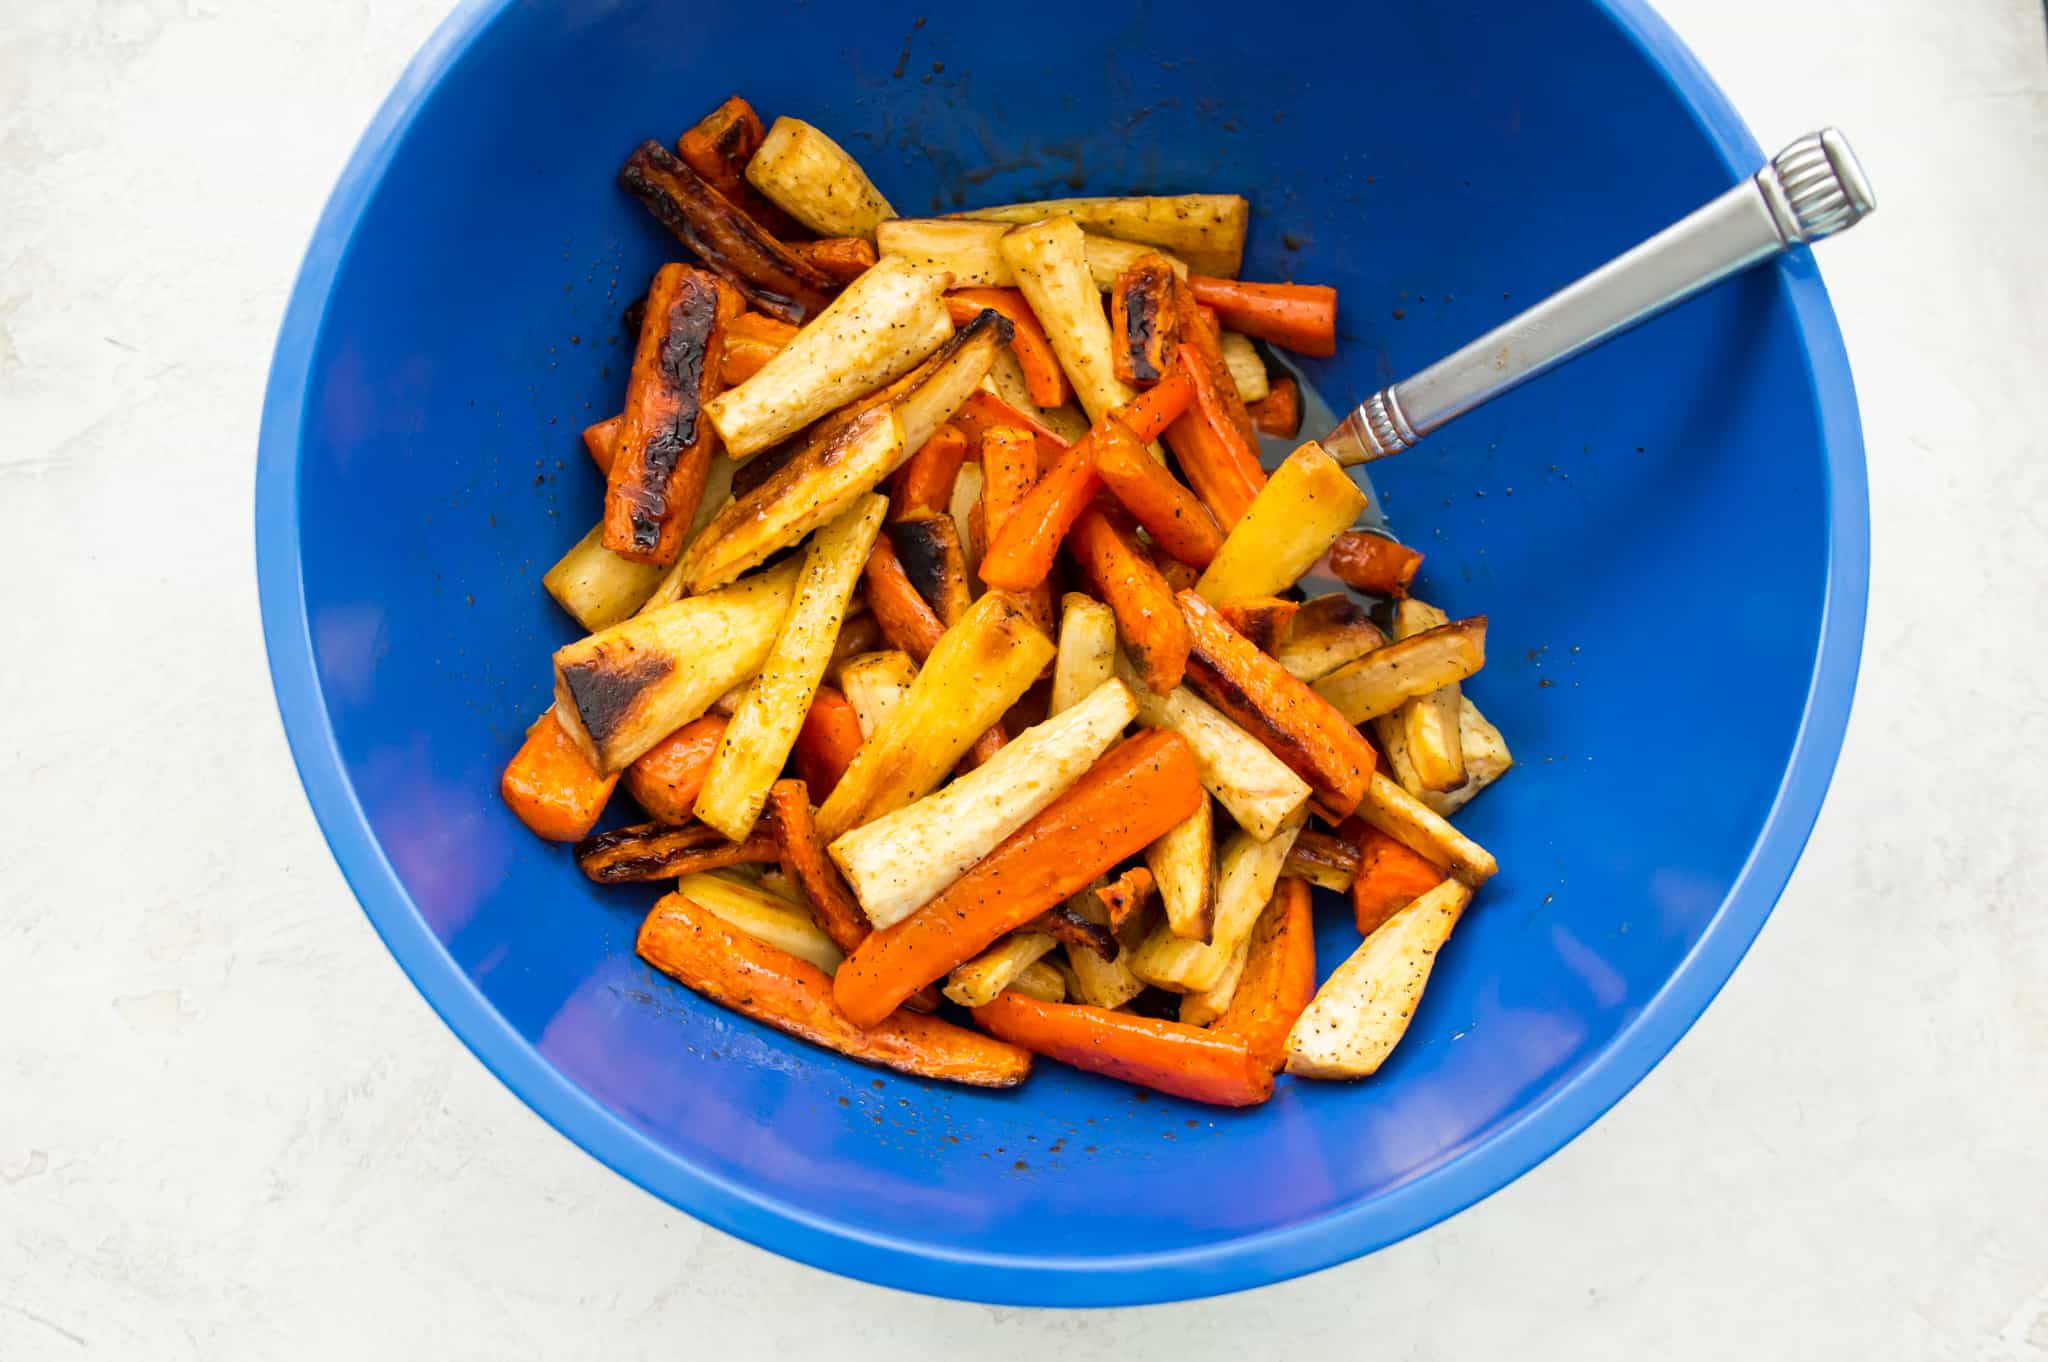 A bowl of roasted chopped carrots and parsnips with a glaze on them.